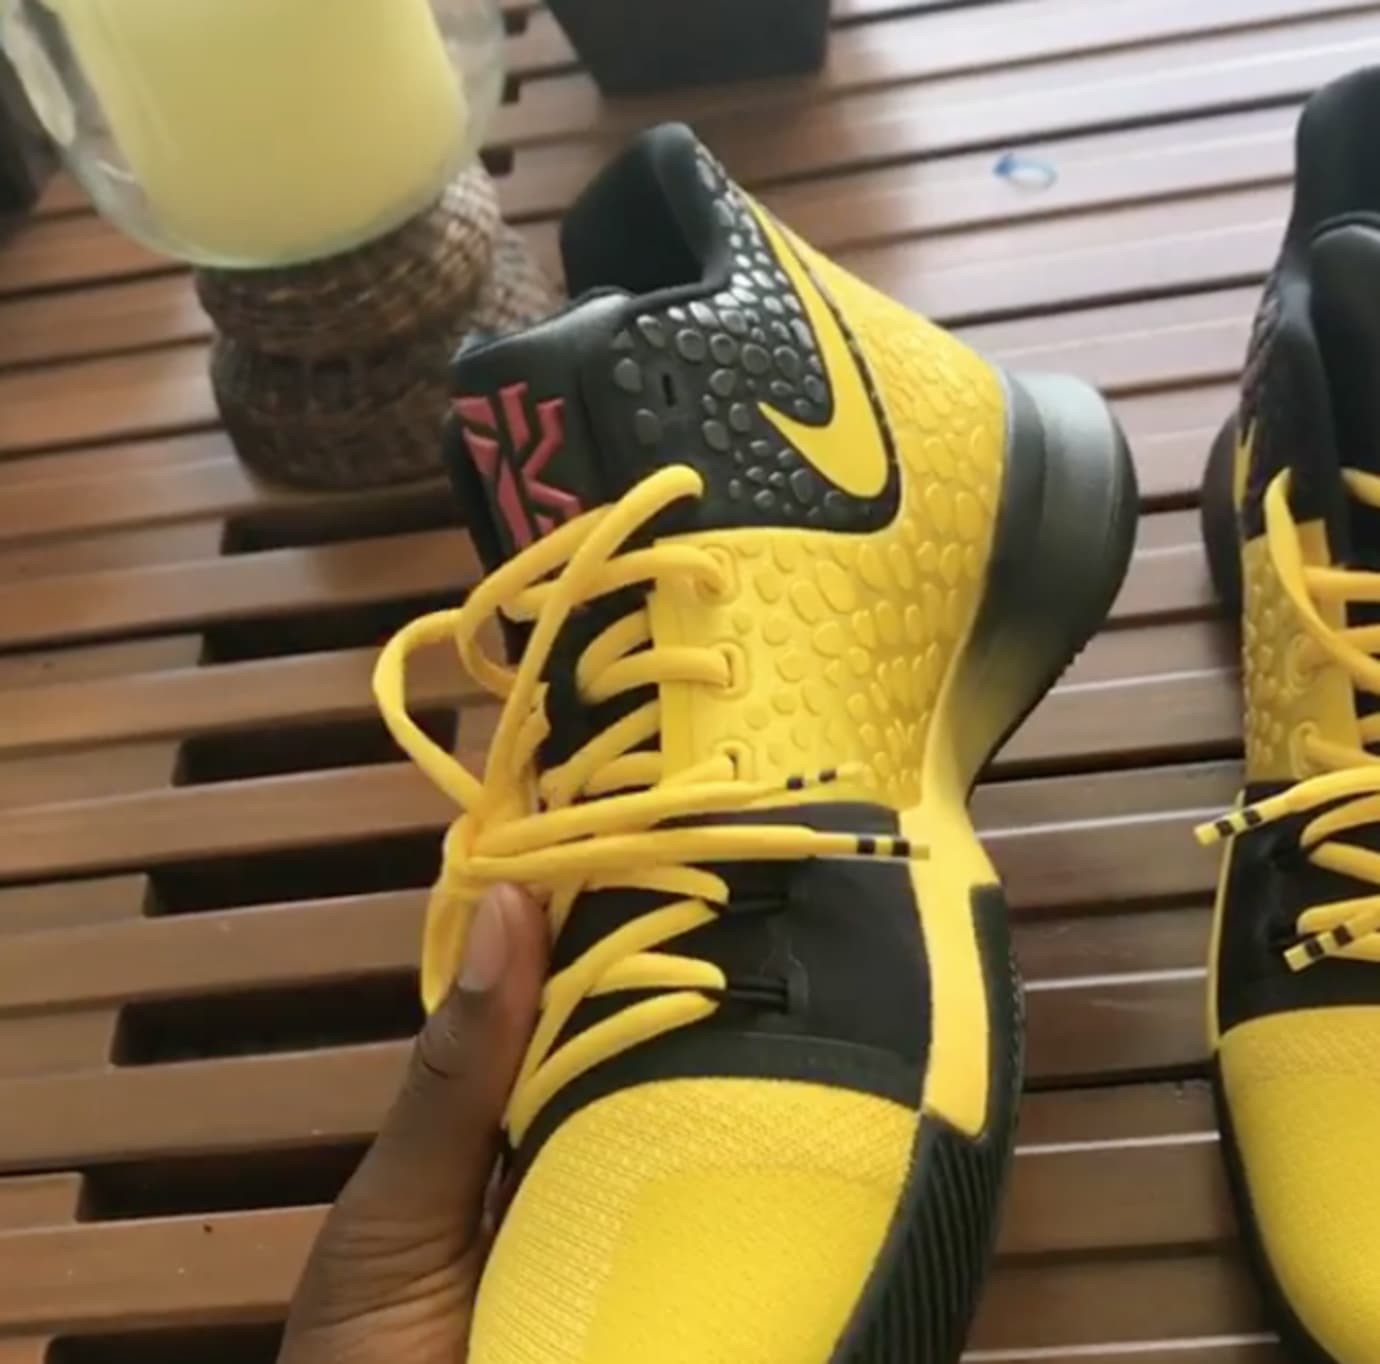 kyrie irving shoes bruce lee